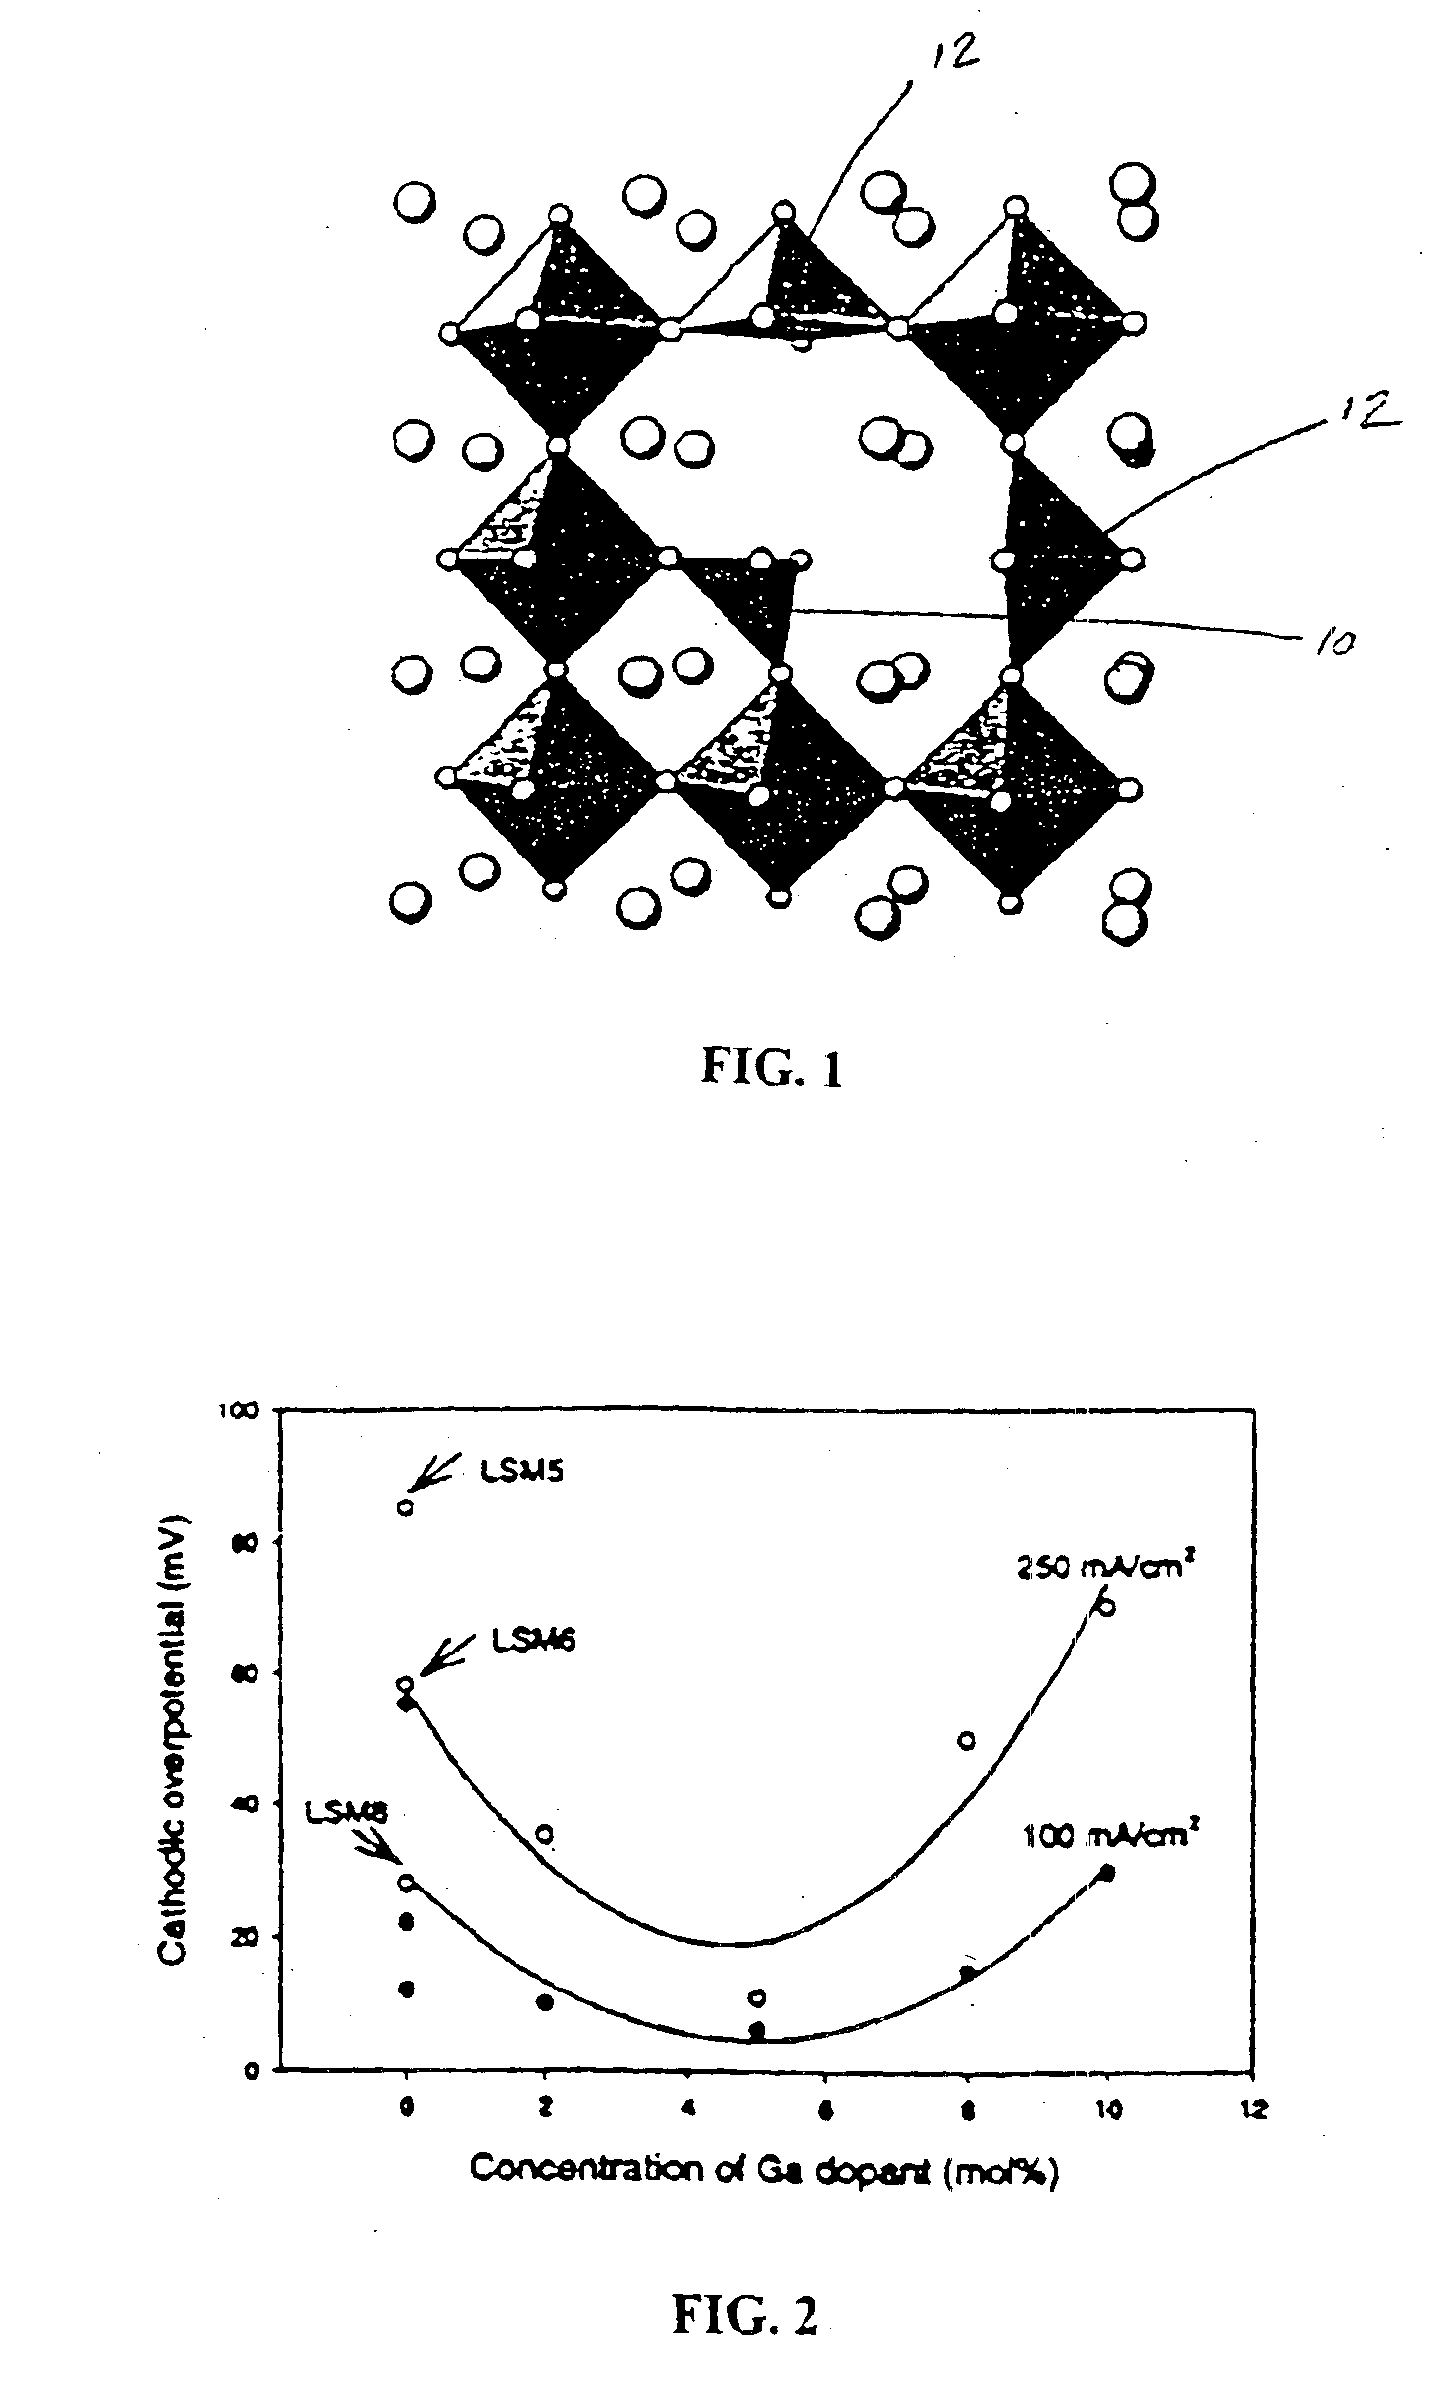 Oxygen ion conducting materials